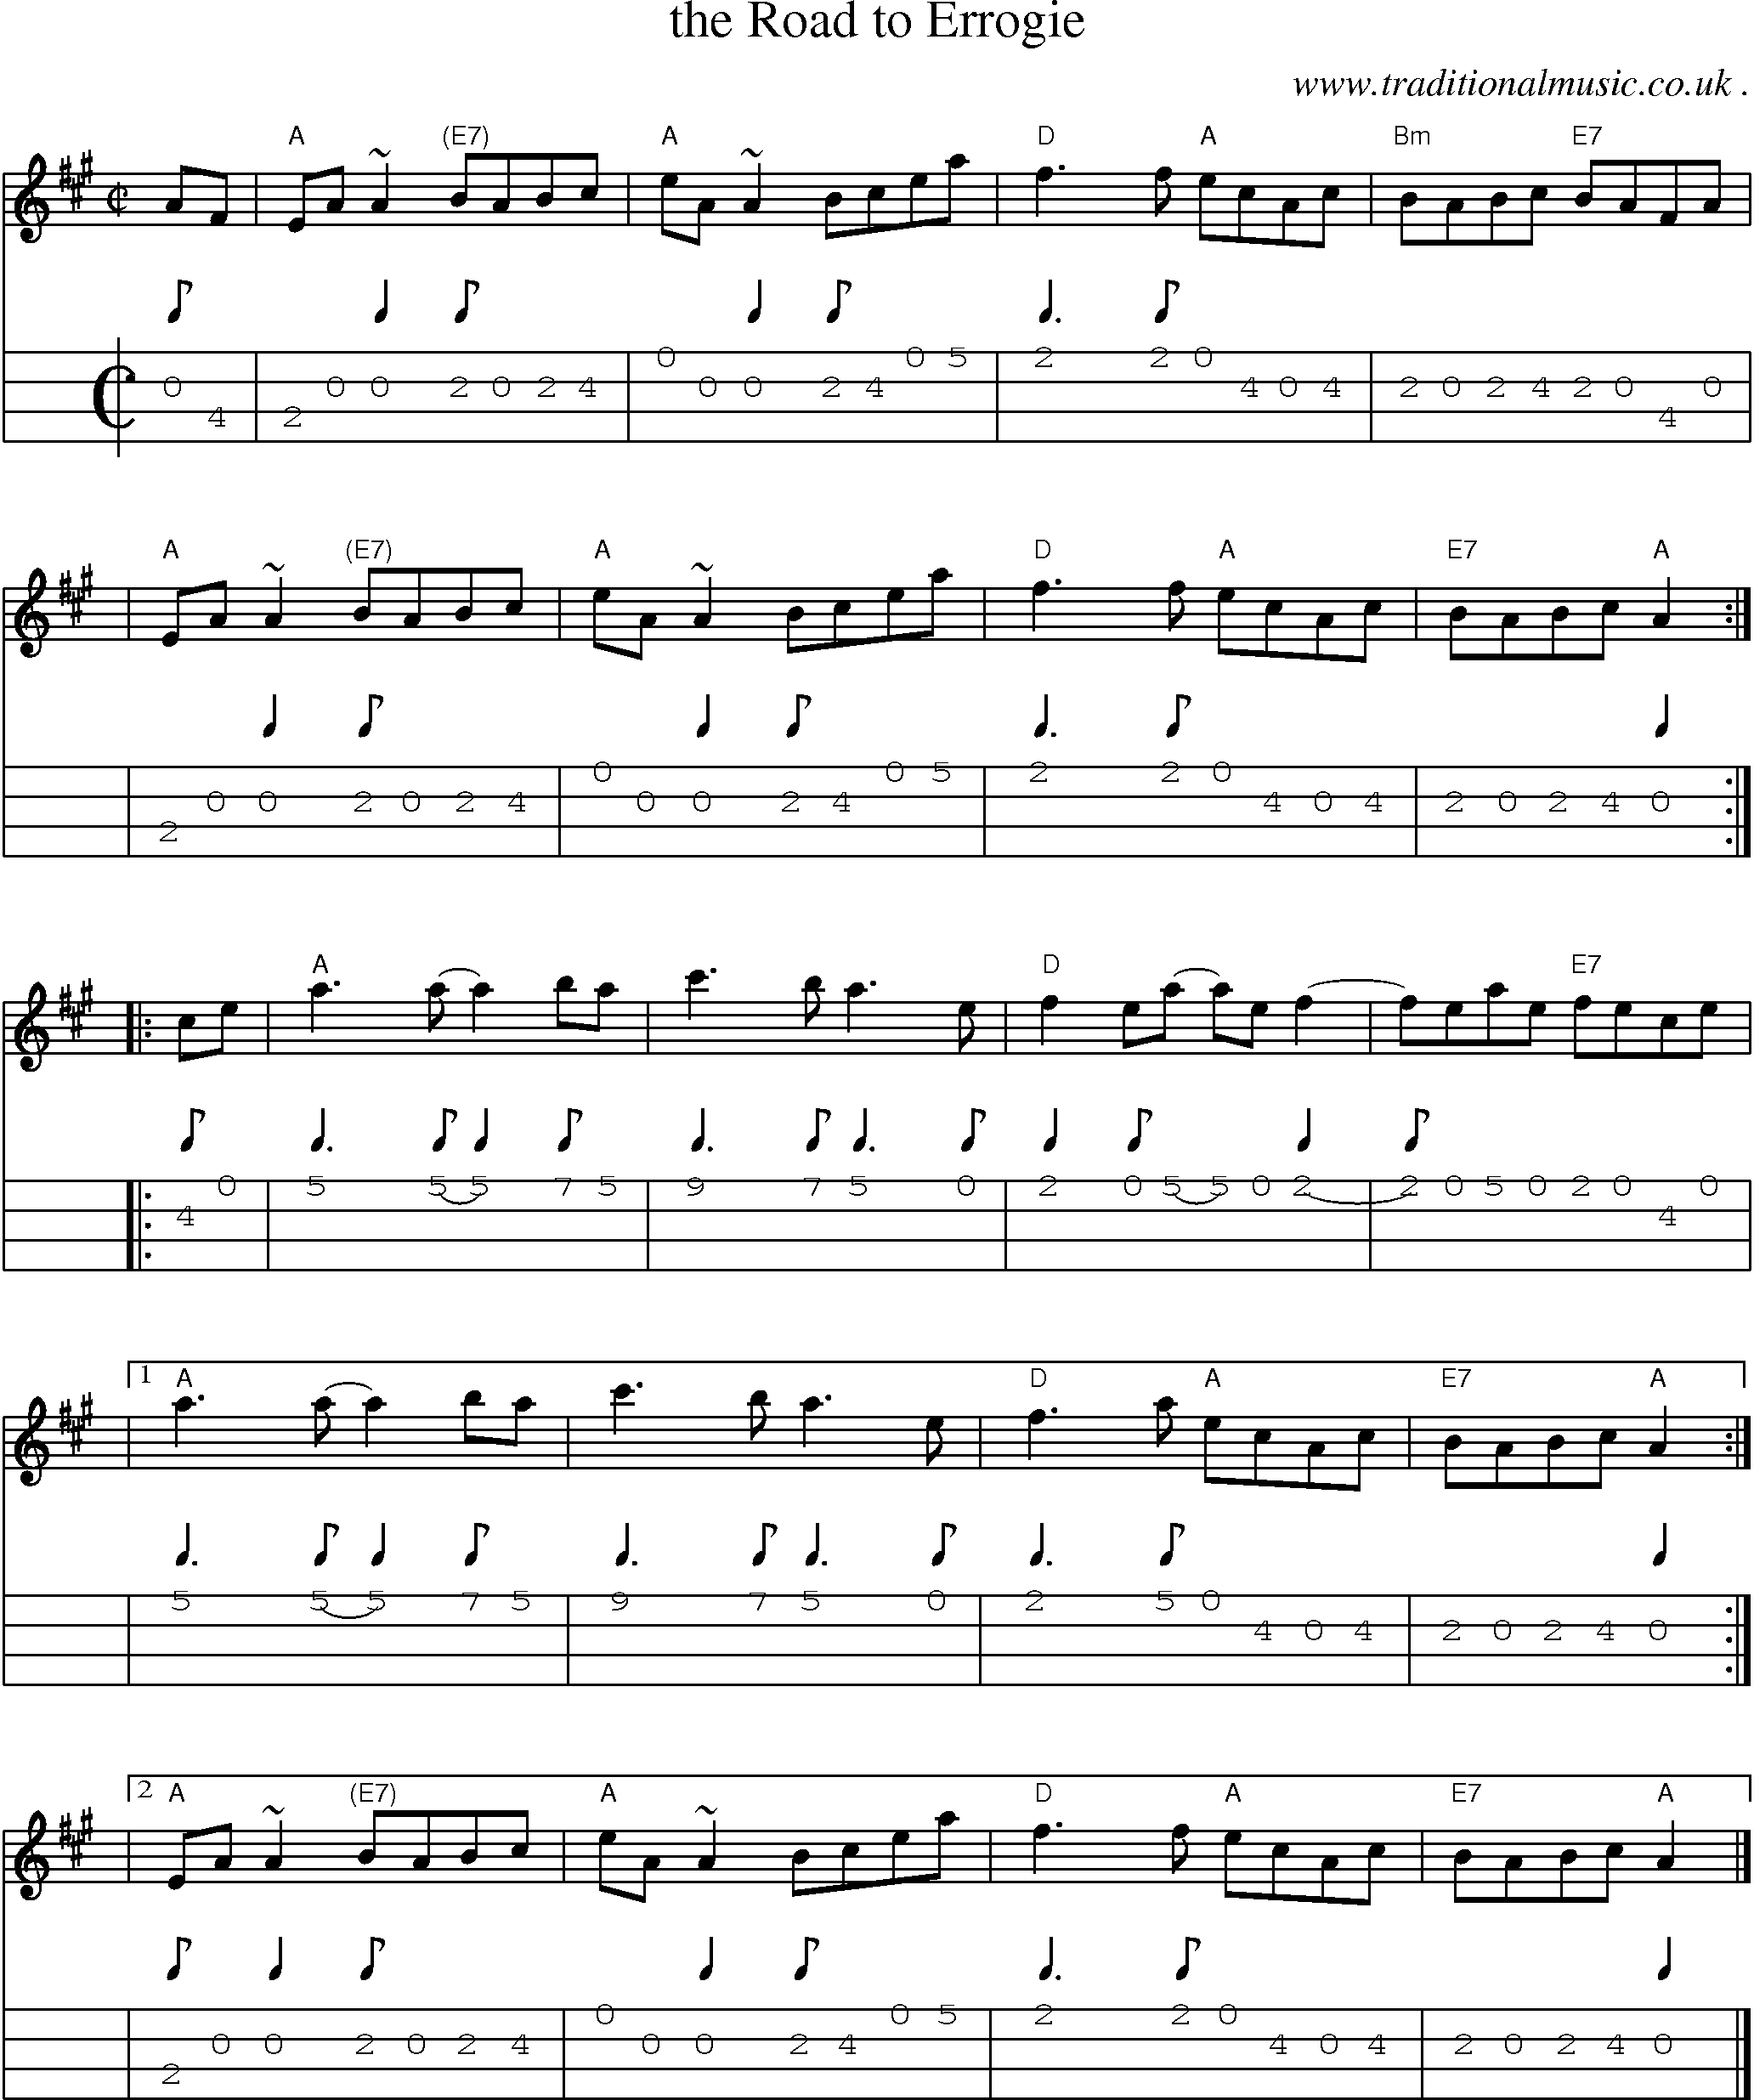 Sheet-music  score, Chords and Mandolin Tabs for The Road To Errogie